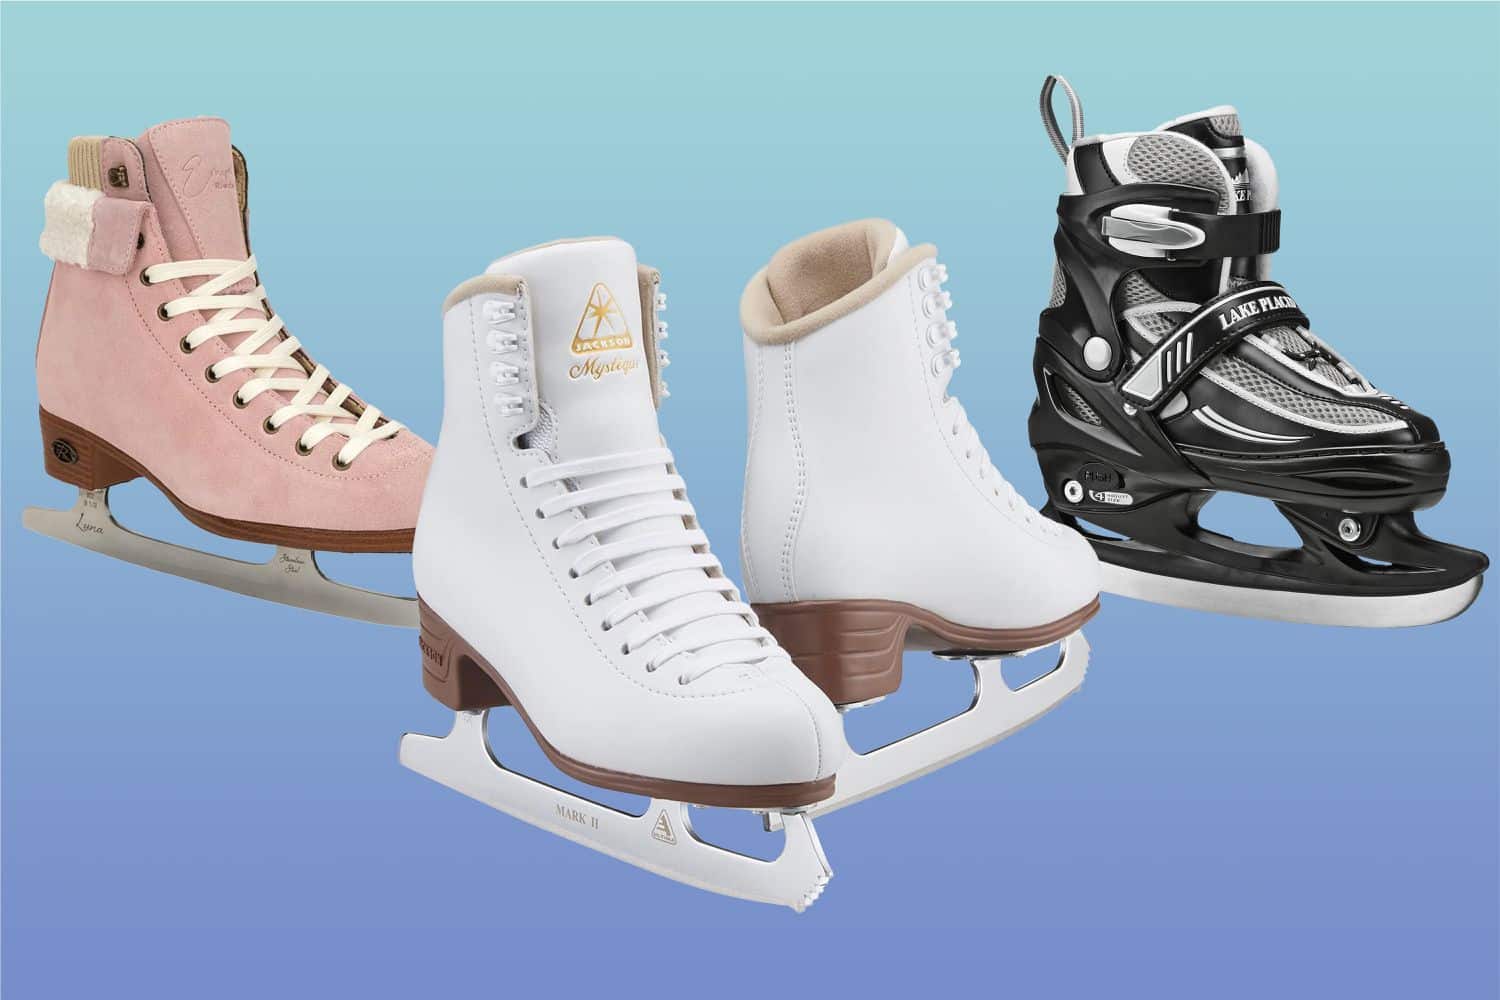 Are There Specific Brands Known for Producing Comfortable Skates?